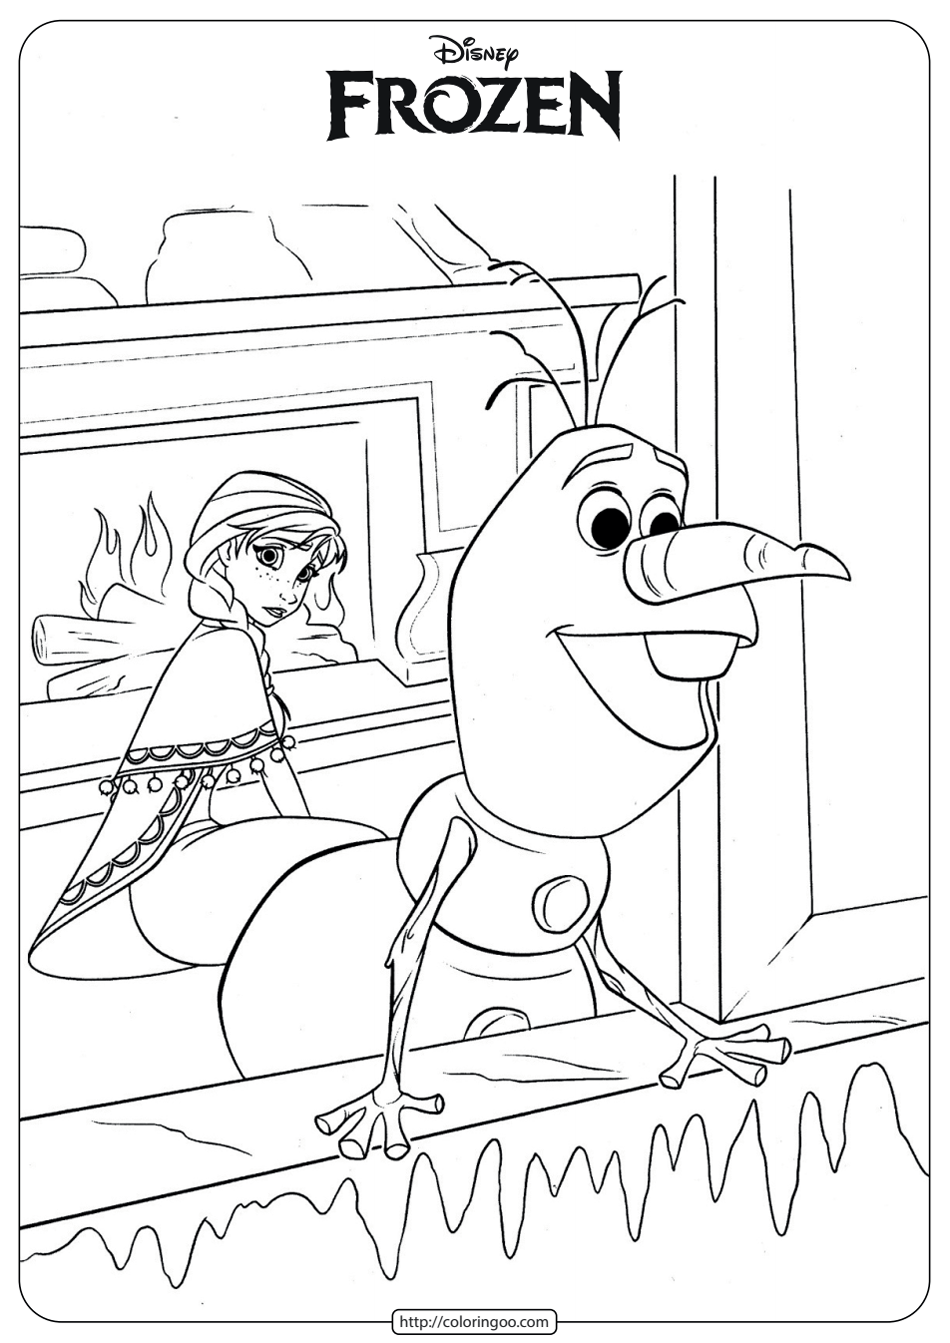 disney frozen anna and olaf coloring pages